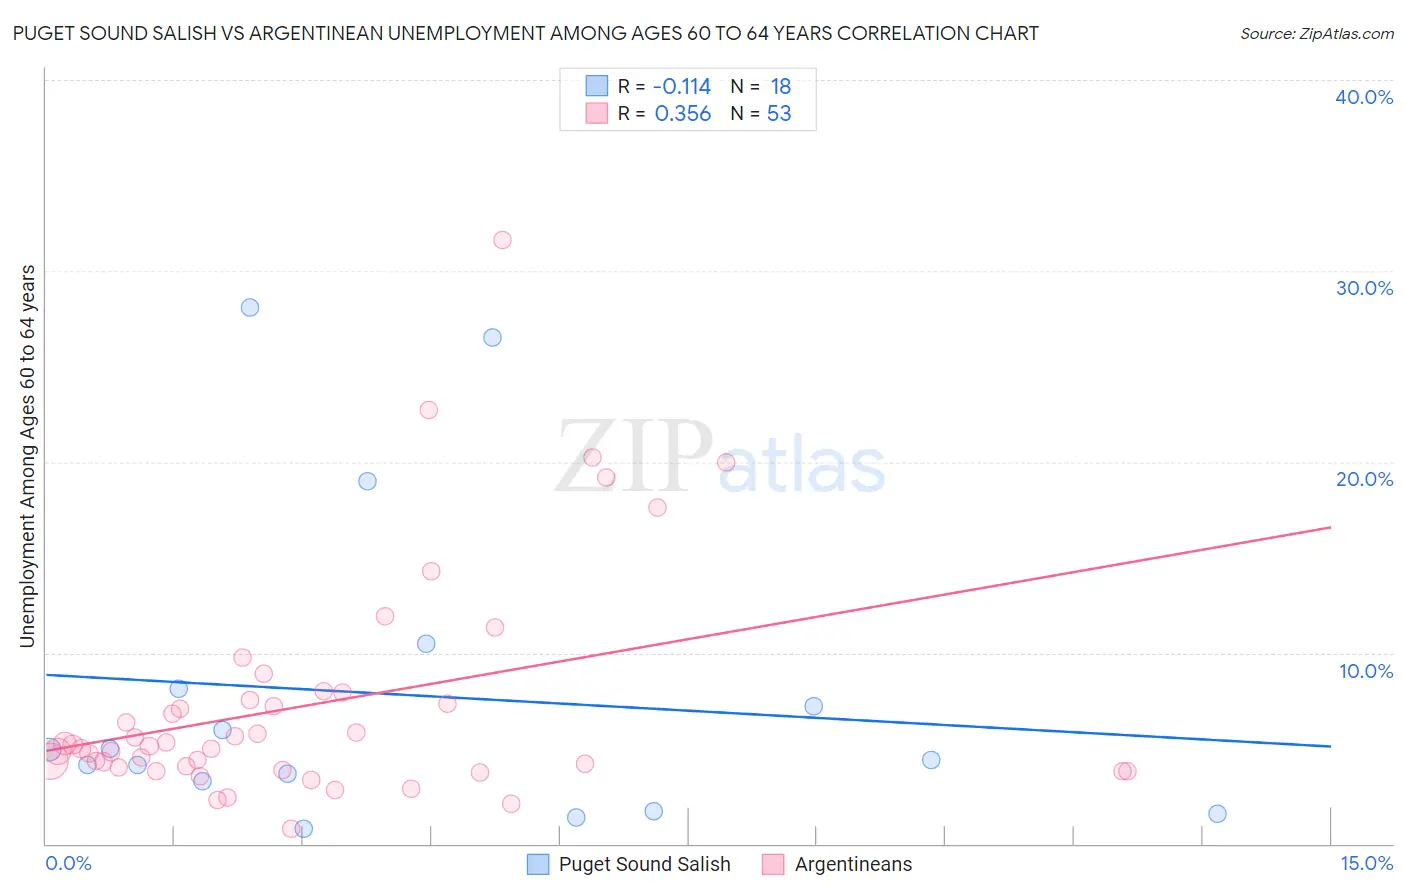 Puget Sound Salish vs Argentinean Unemployment Among Ages 60 to 64 years